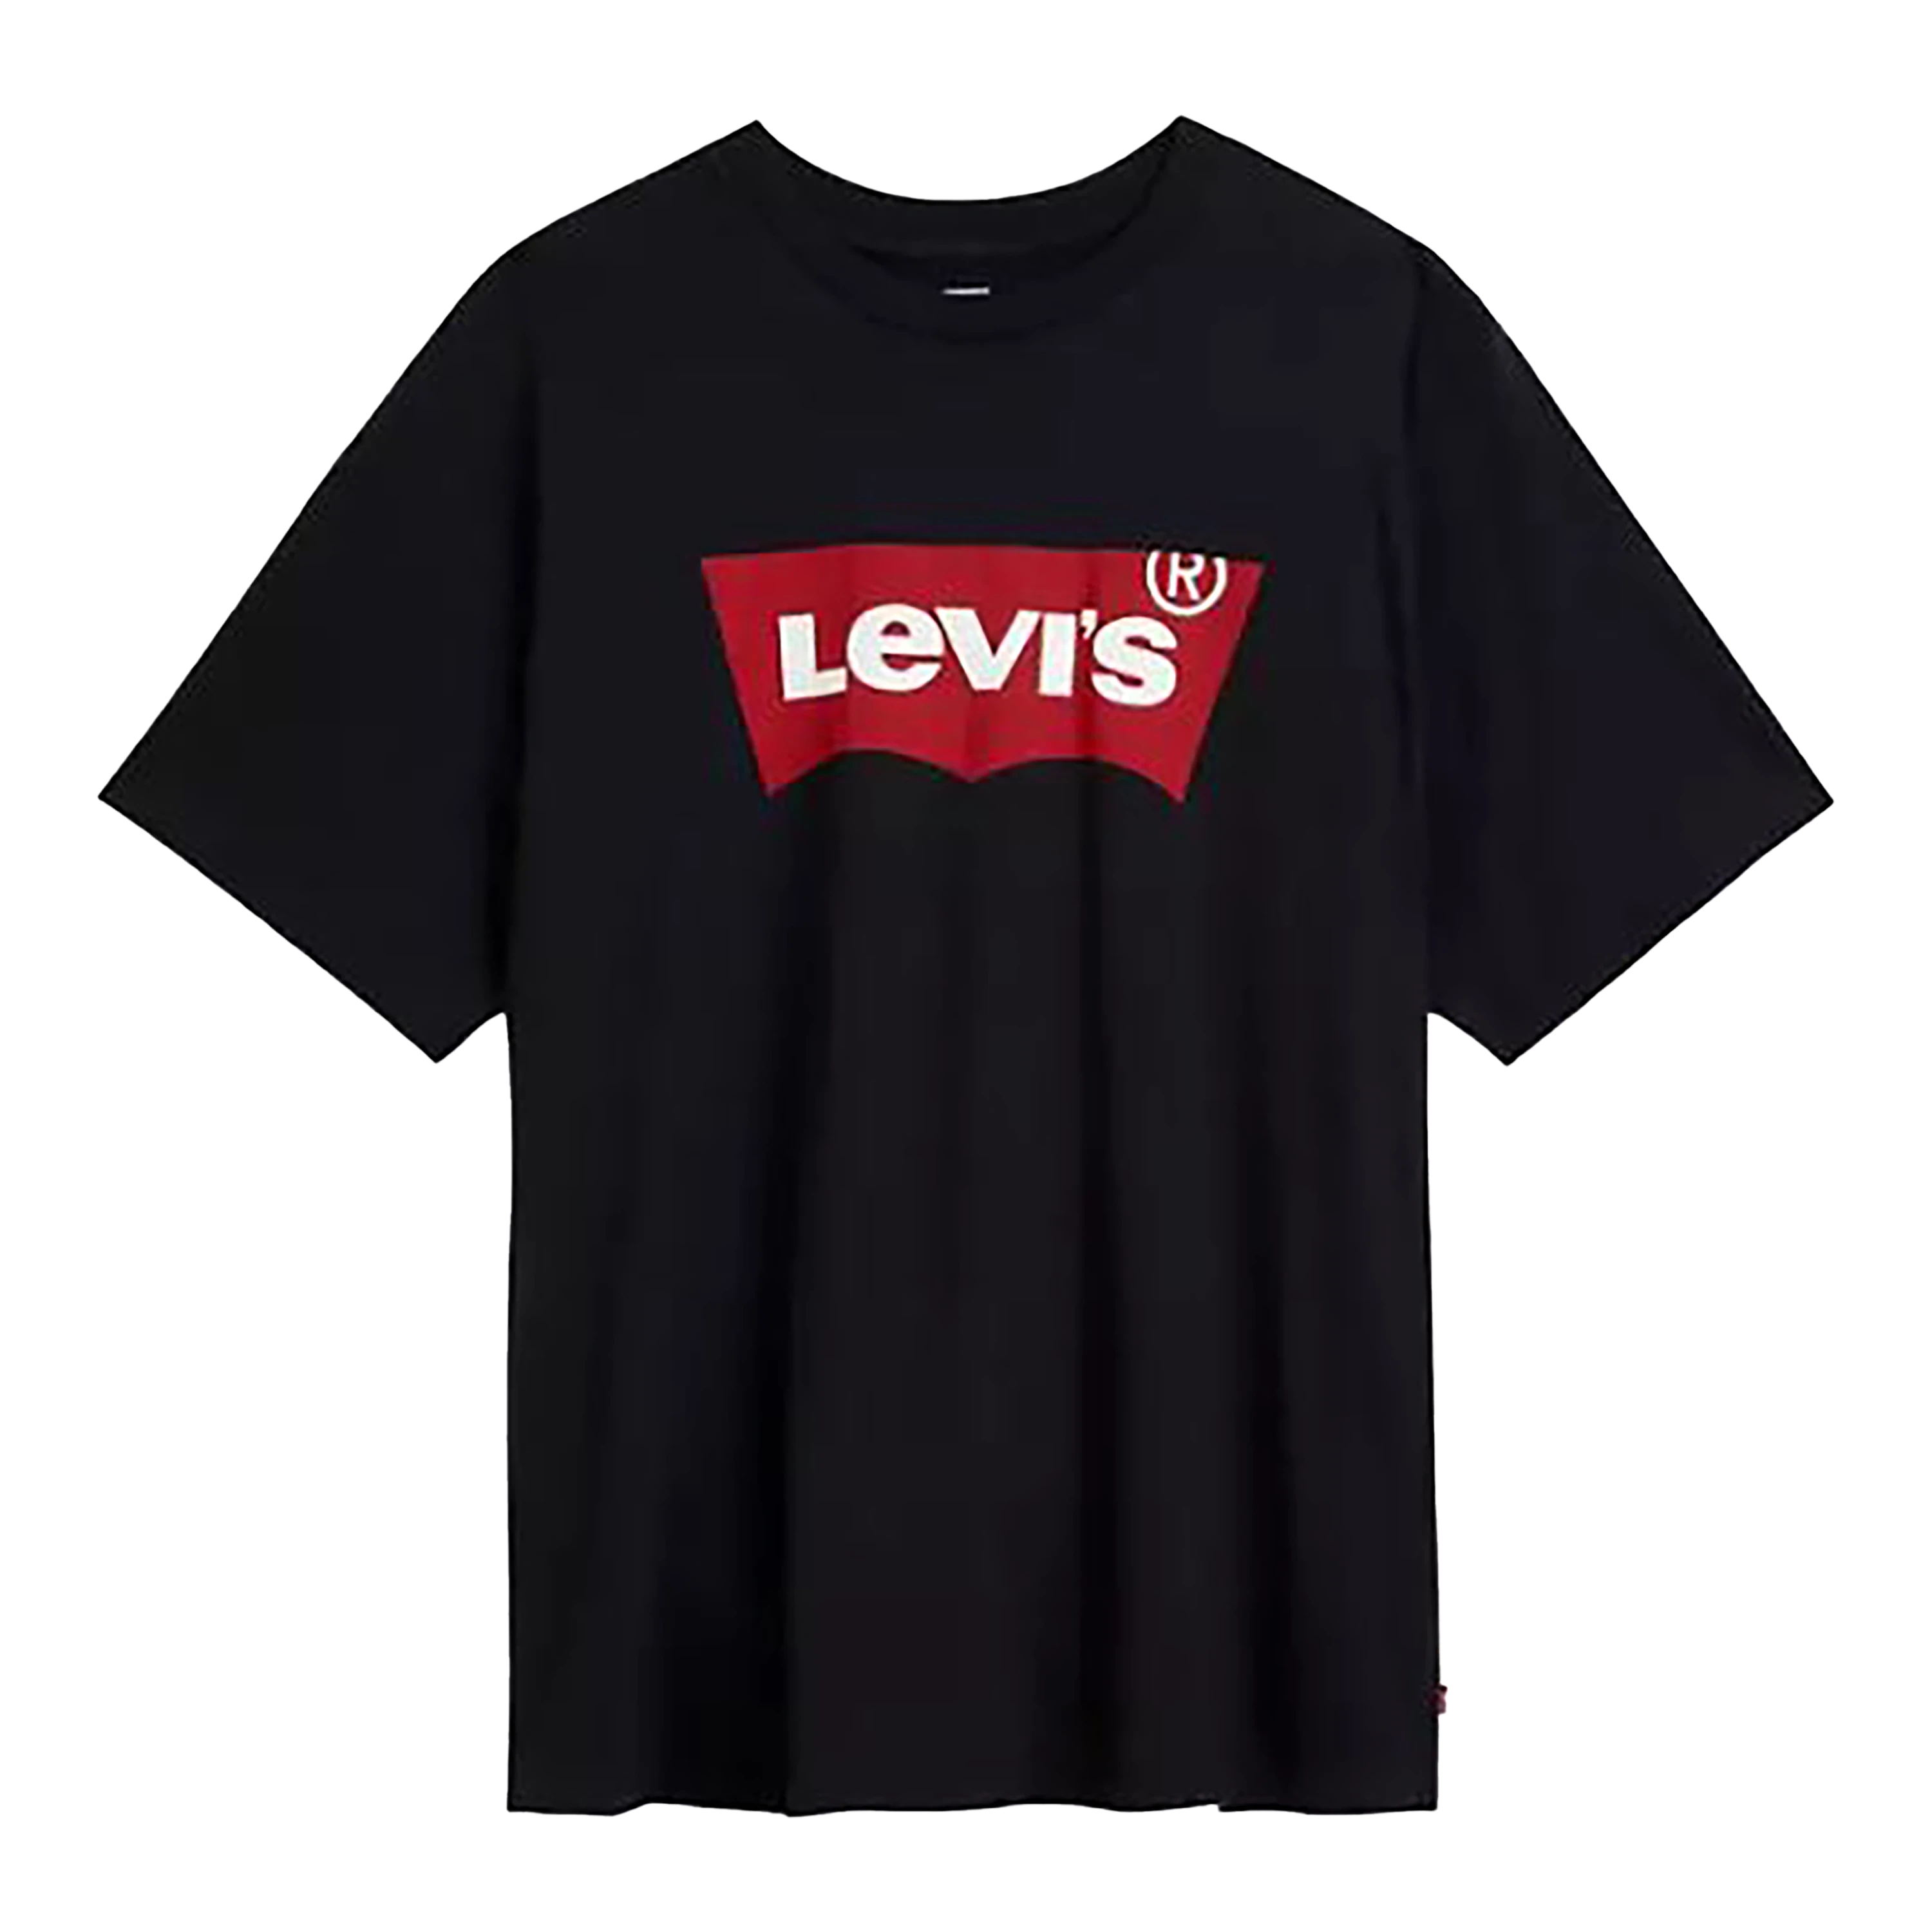 Levi’s Graphic Tee for Men